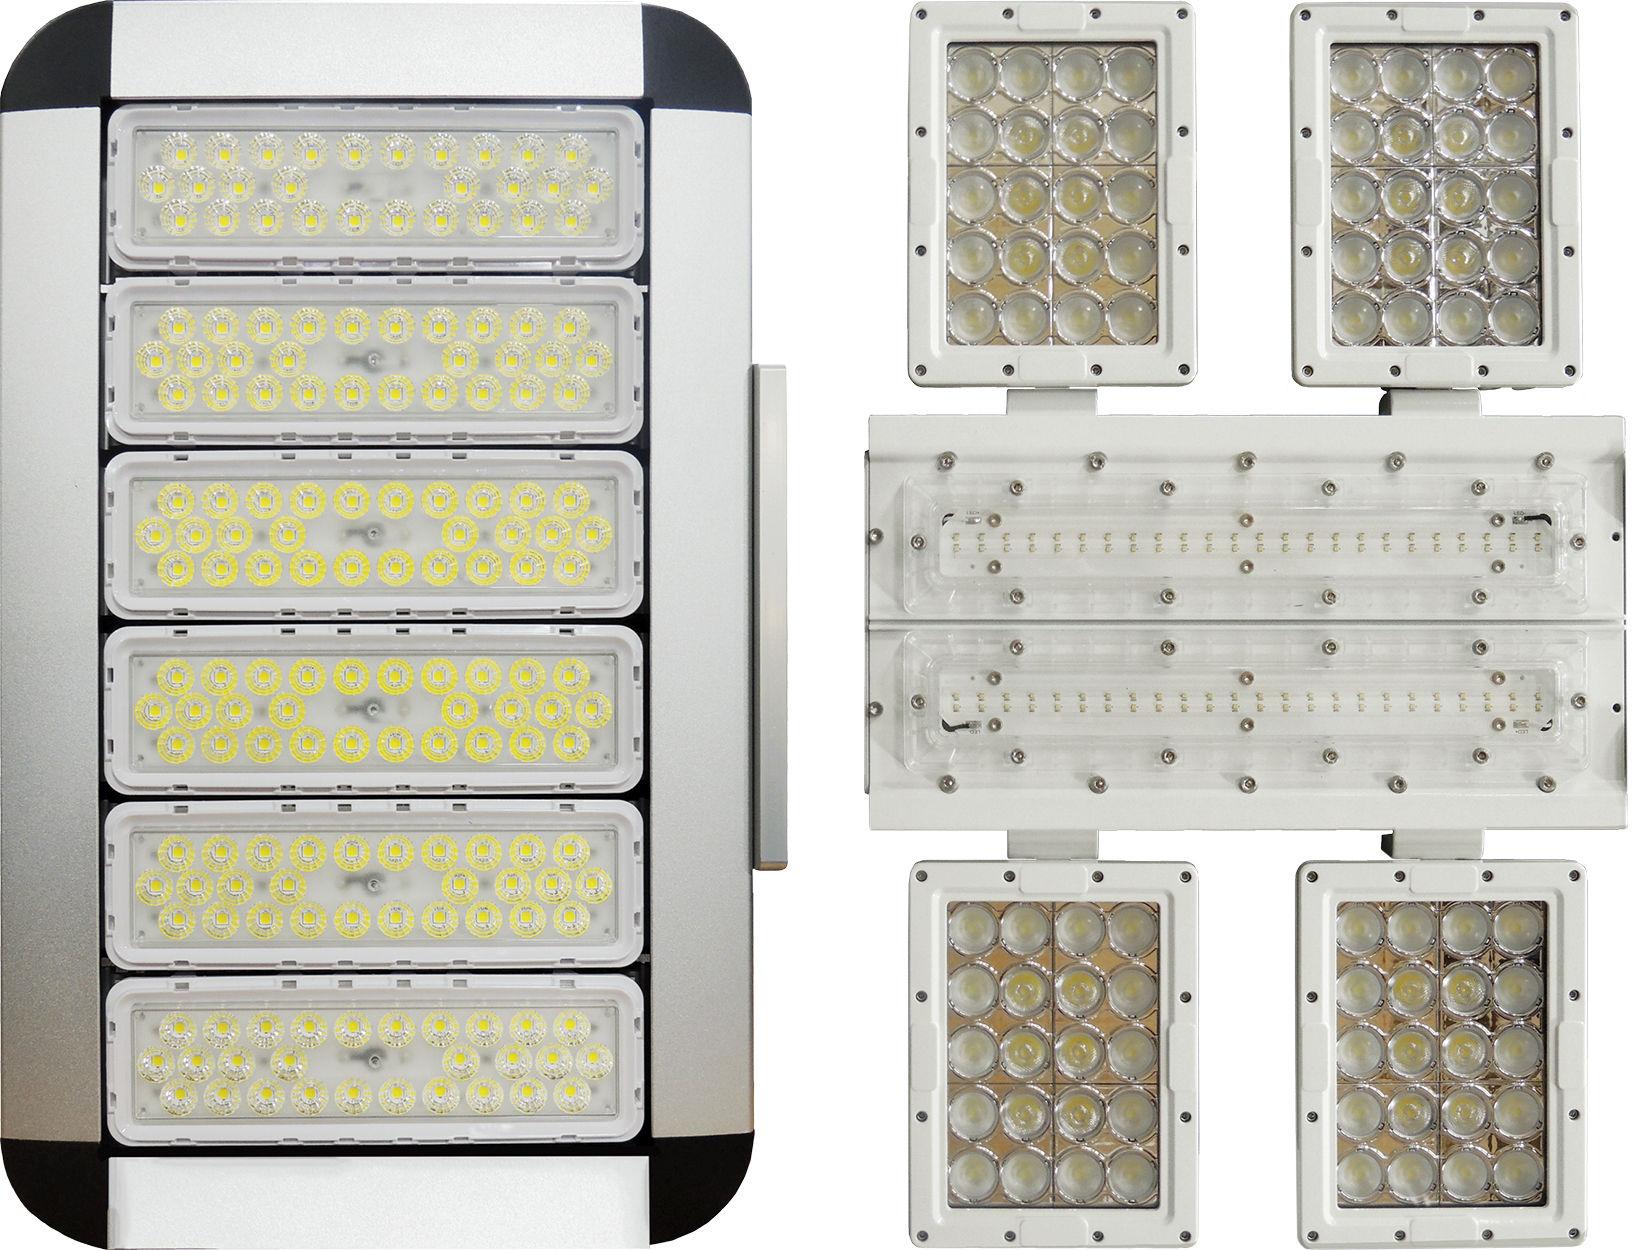 The Will-Burt and Night Scan families of LED lamps are the only LED scene lights designed specifically for Night Scan light towers